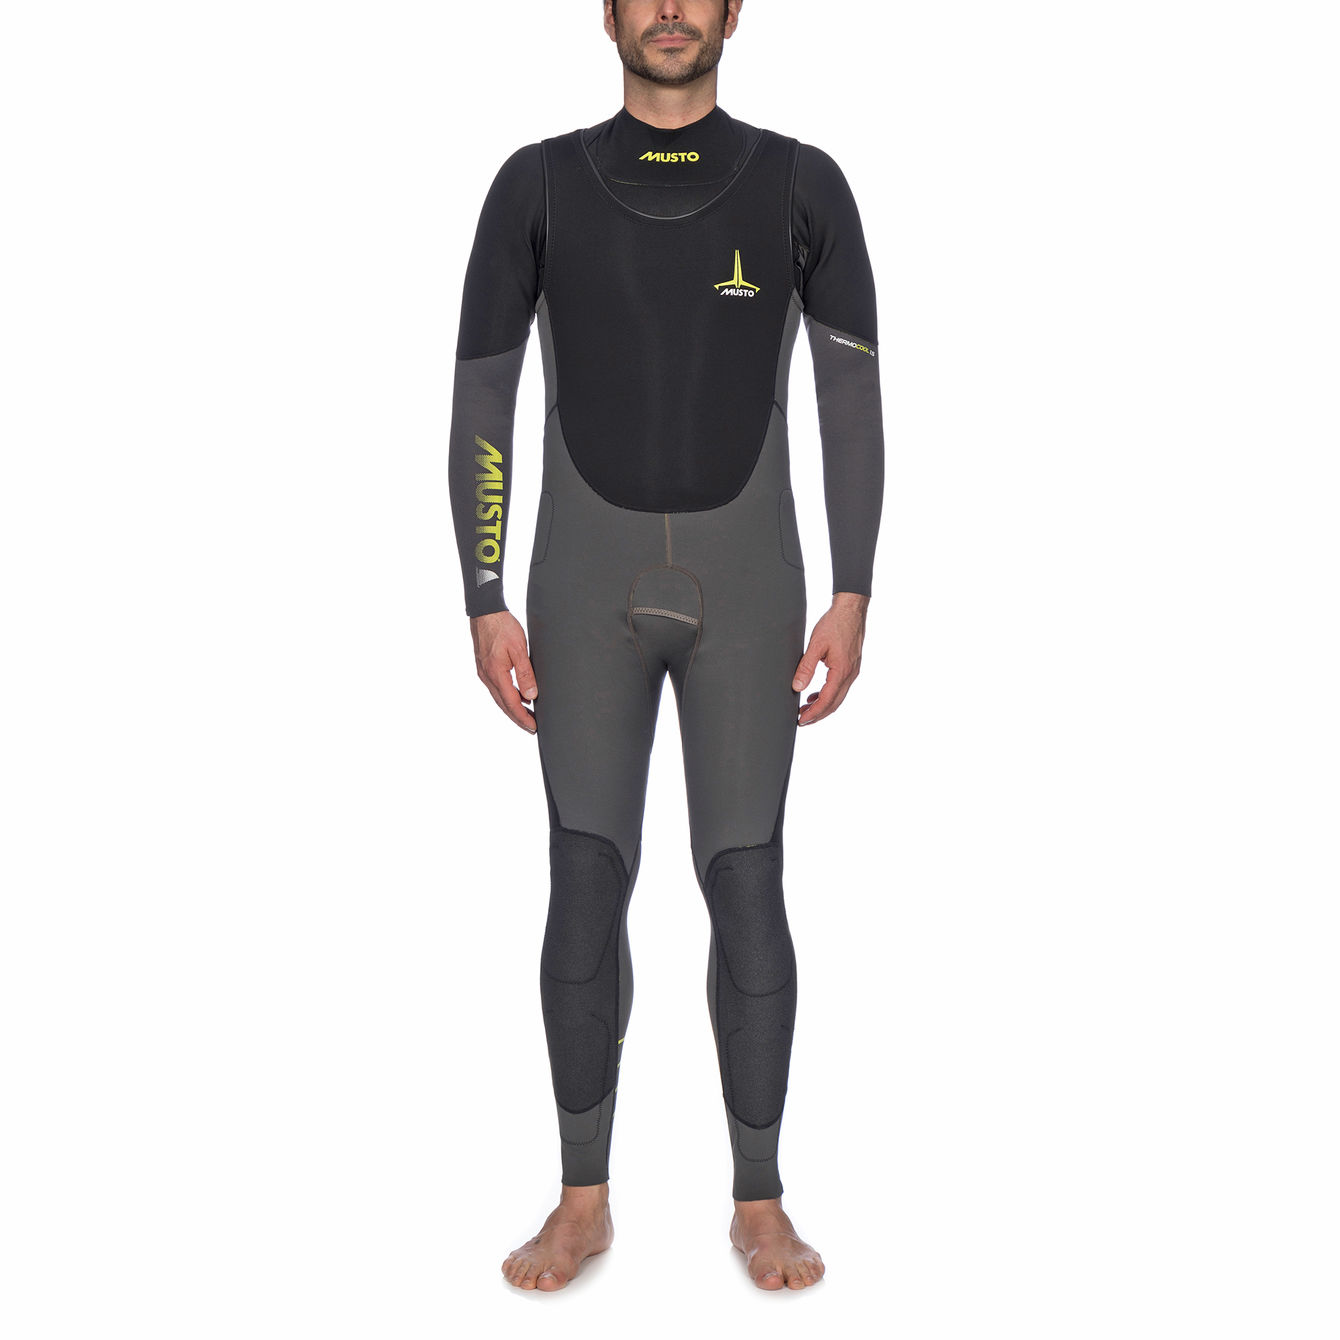 Foiling Thermocool Impact Wetsuit Review